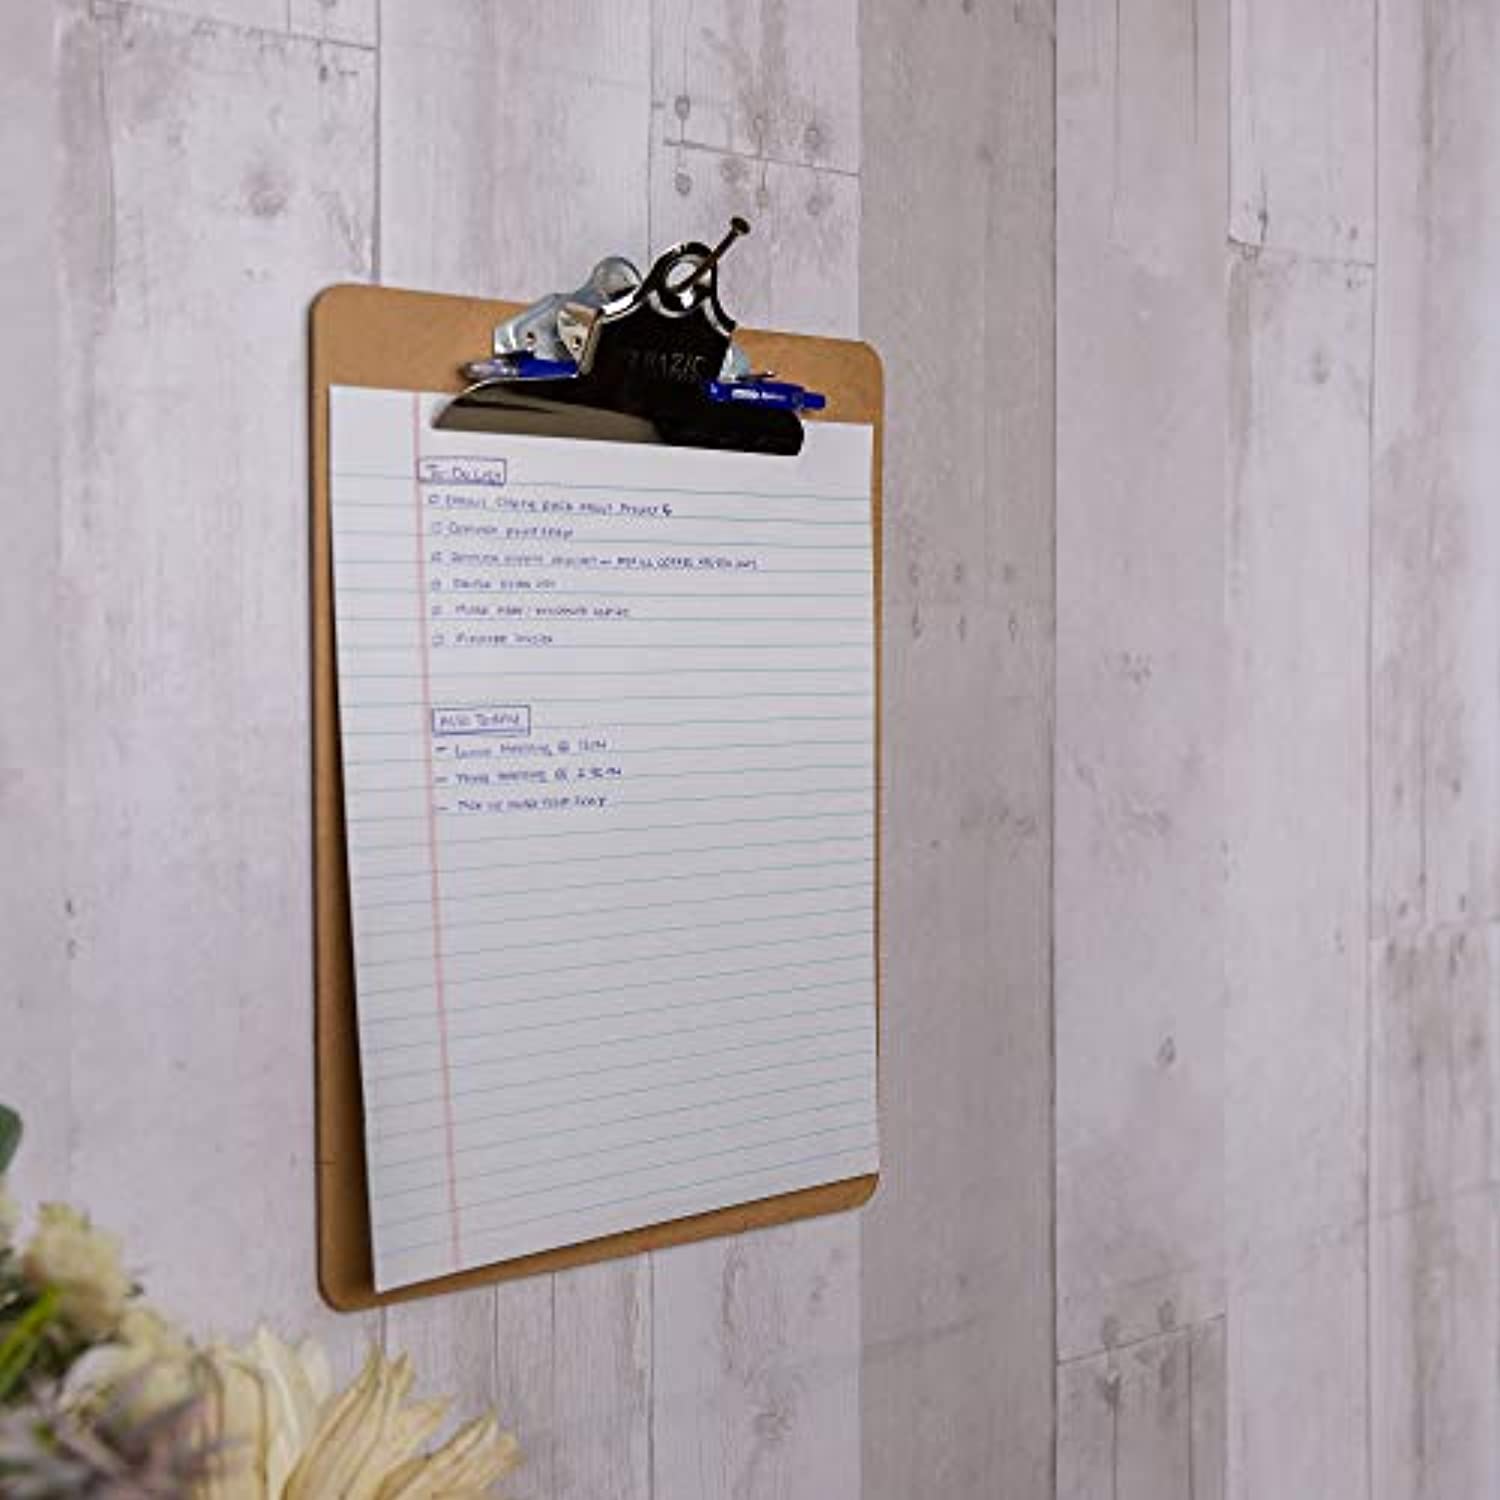 BAZIC Legal Size Wood Hardboard Clipboard w/Sturdy Spring Clip, 16.5" x 8.5" Paperboard Strong & Large Capacity, Business Office School Teacher Student College, 1-Pack.